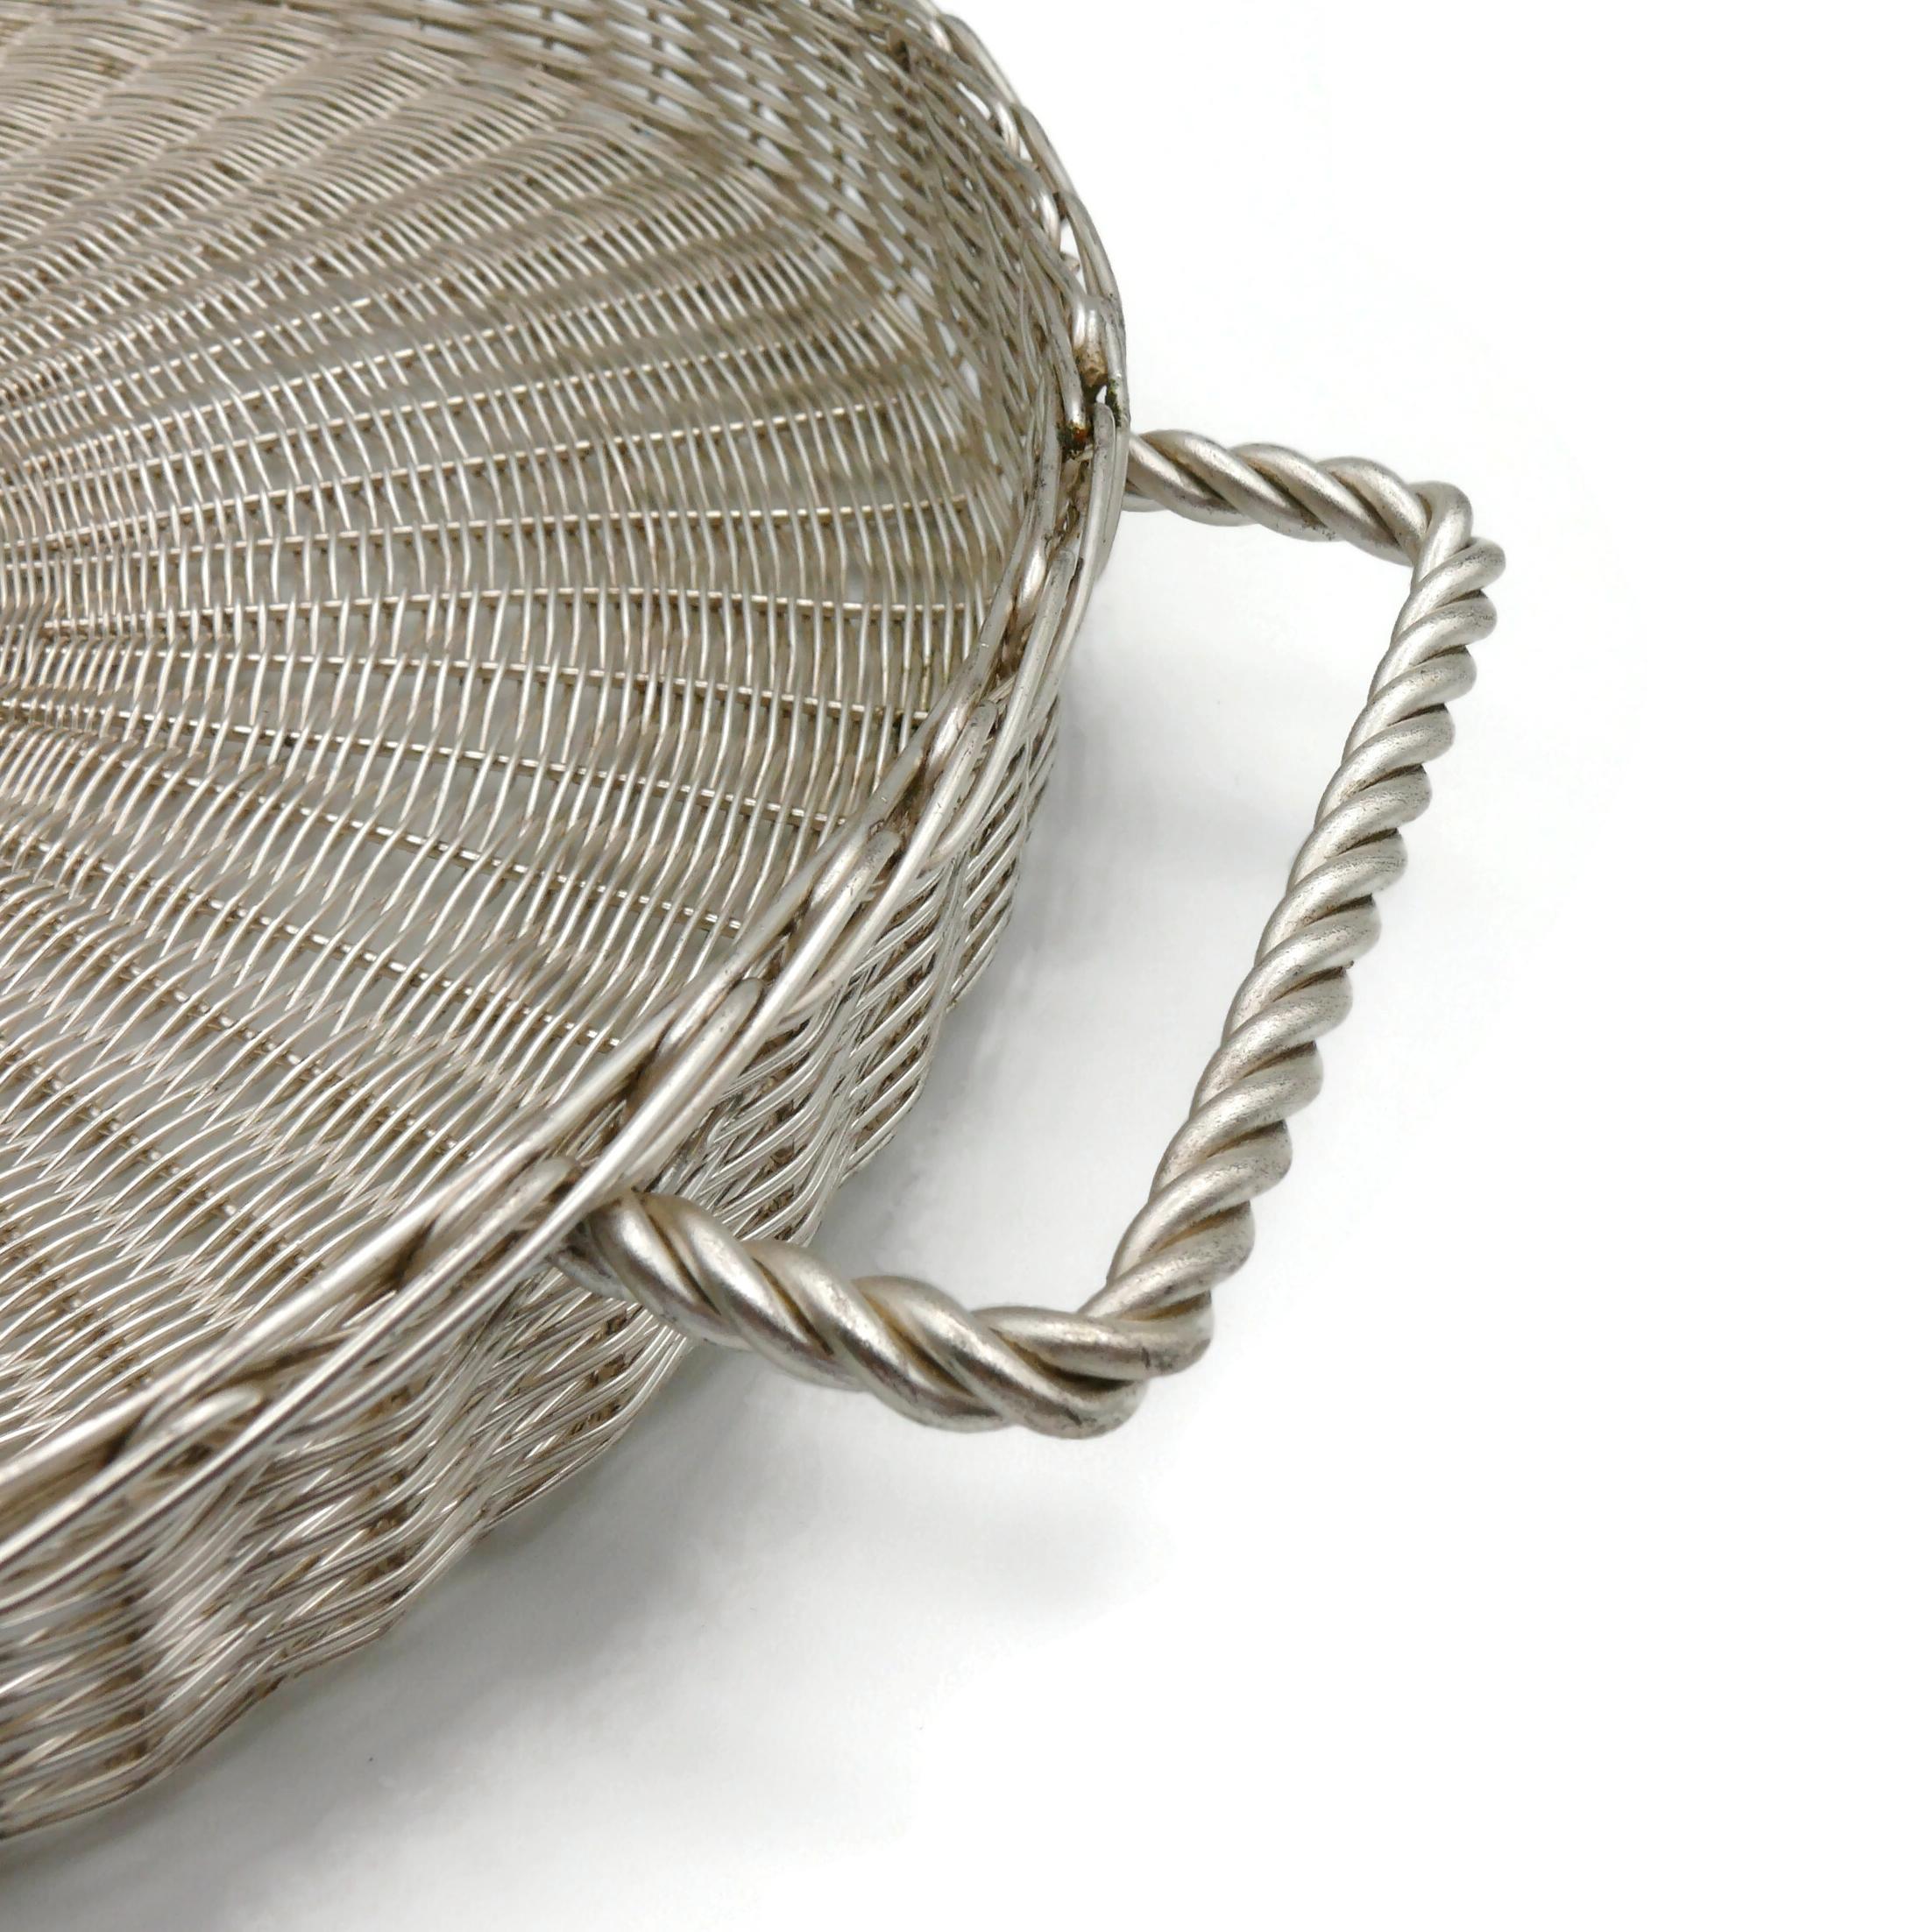 CHRISTIAN DIOR Home Collection Vintage Silver Plated Wicker Style Basket For Sale 3